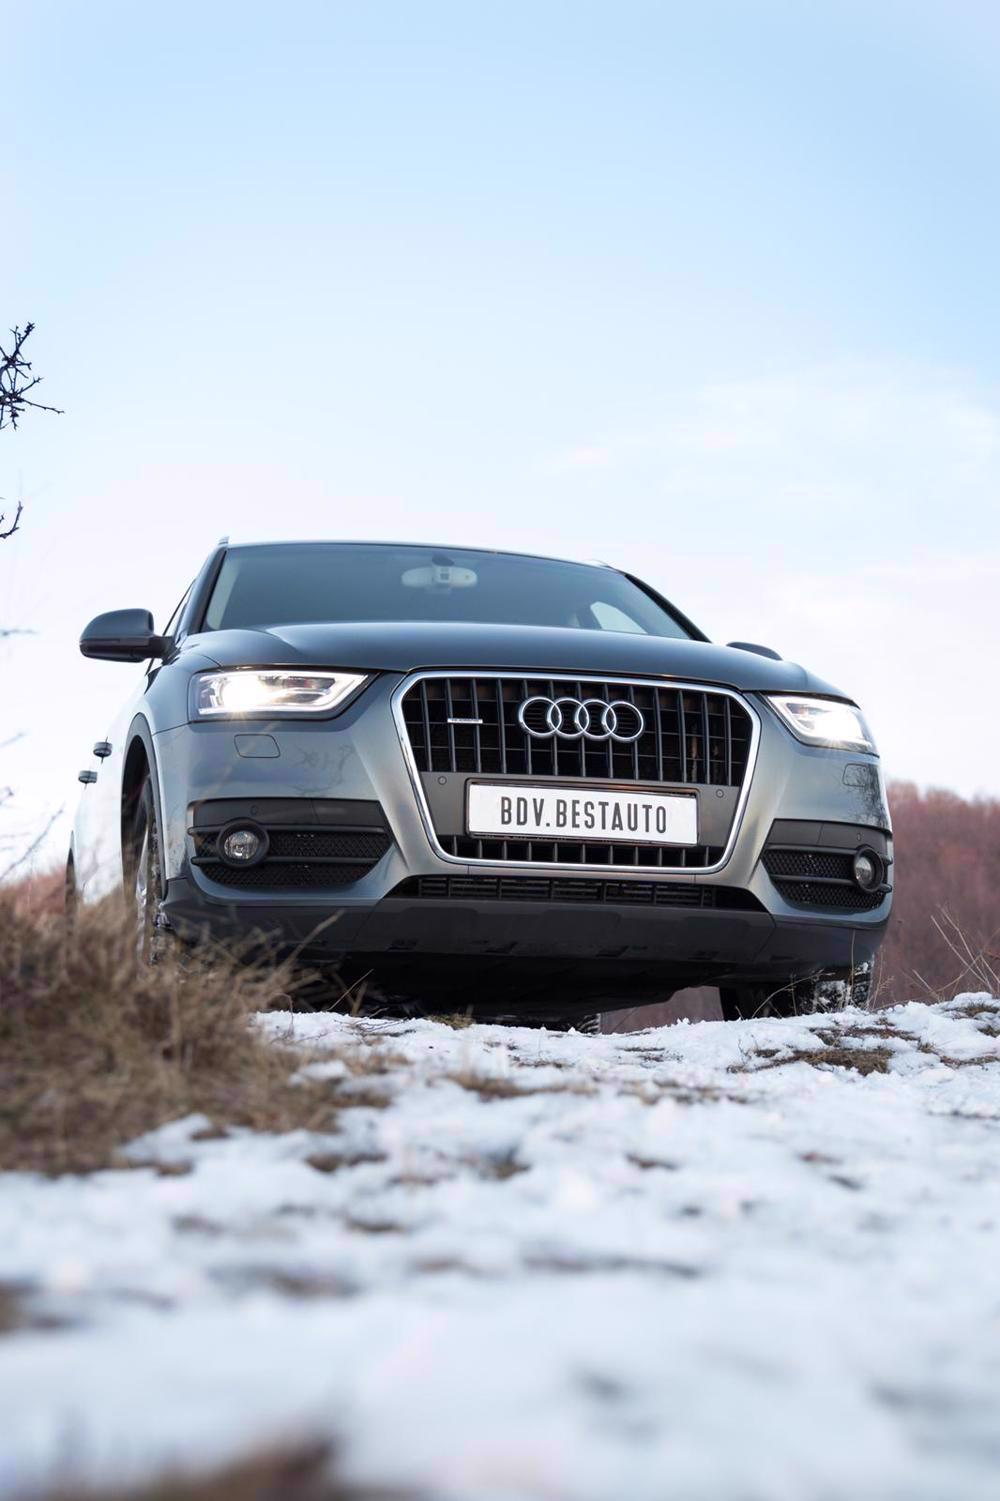 Quattro, the best traction ever invented?